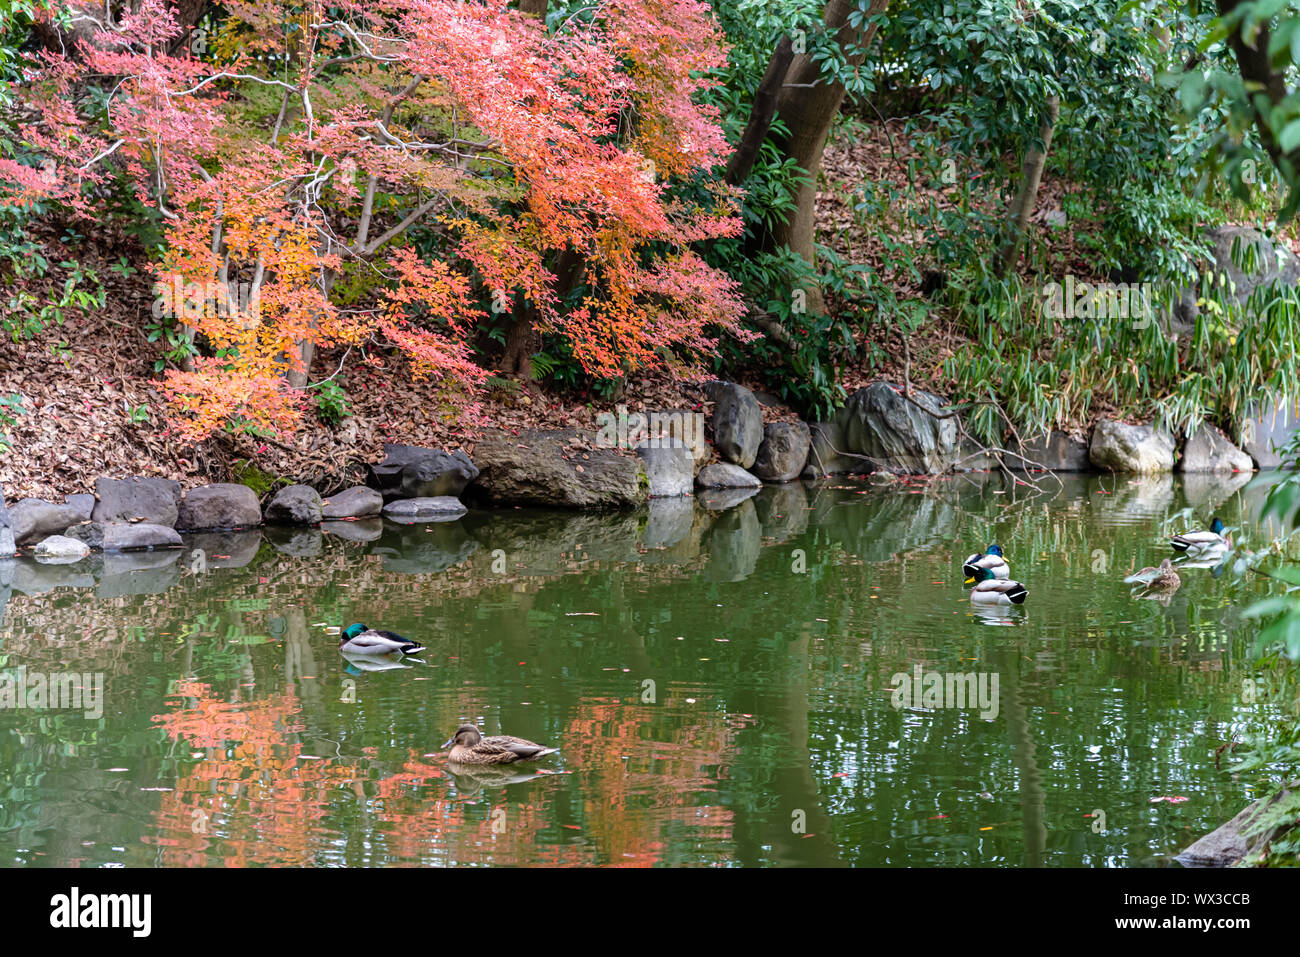 Wild ducks swimming in water in sunny day. autumn foliage scenery view. Kyoto Imperial Palace, Kyoto, Japan Stock Photo